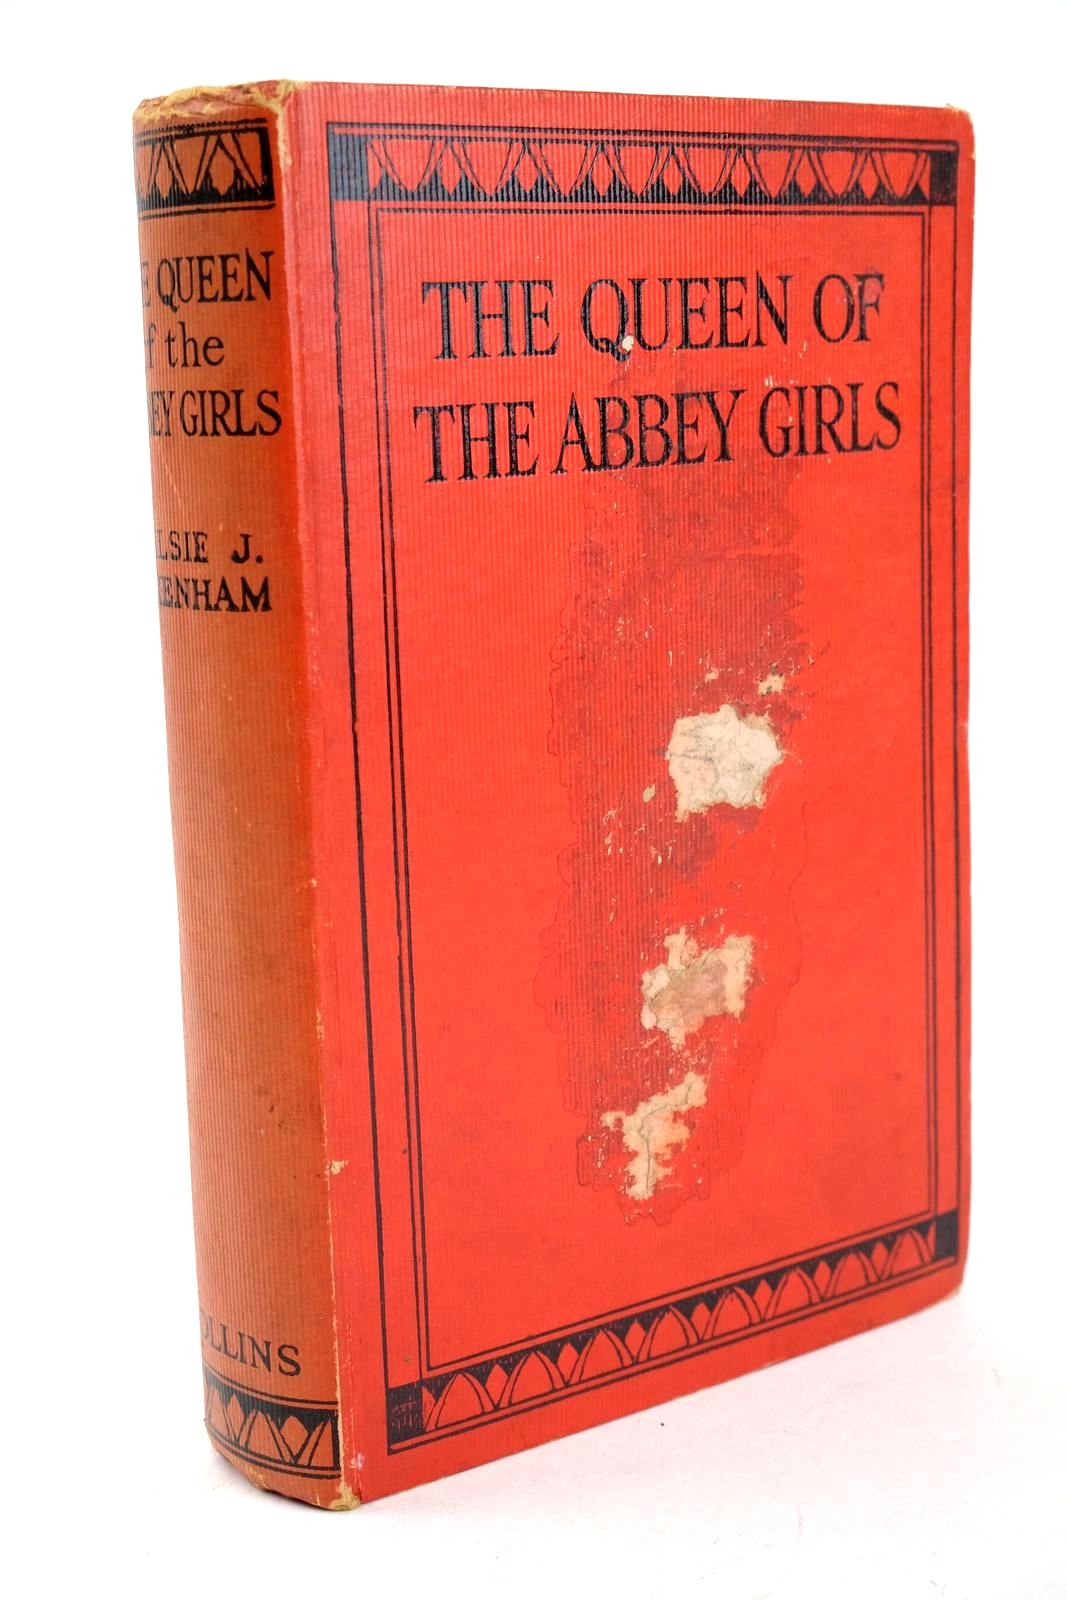 Photo of QUEEN OF THE ABBEY GIRLS- Stock Number: 1327048